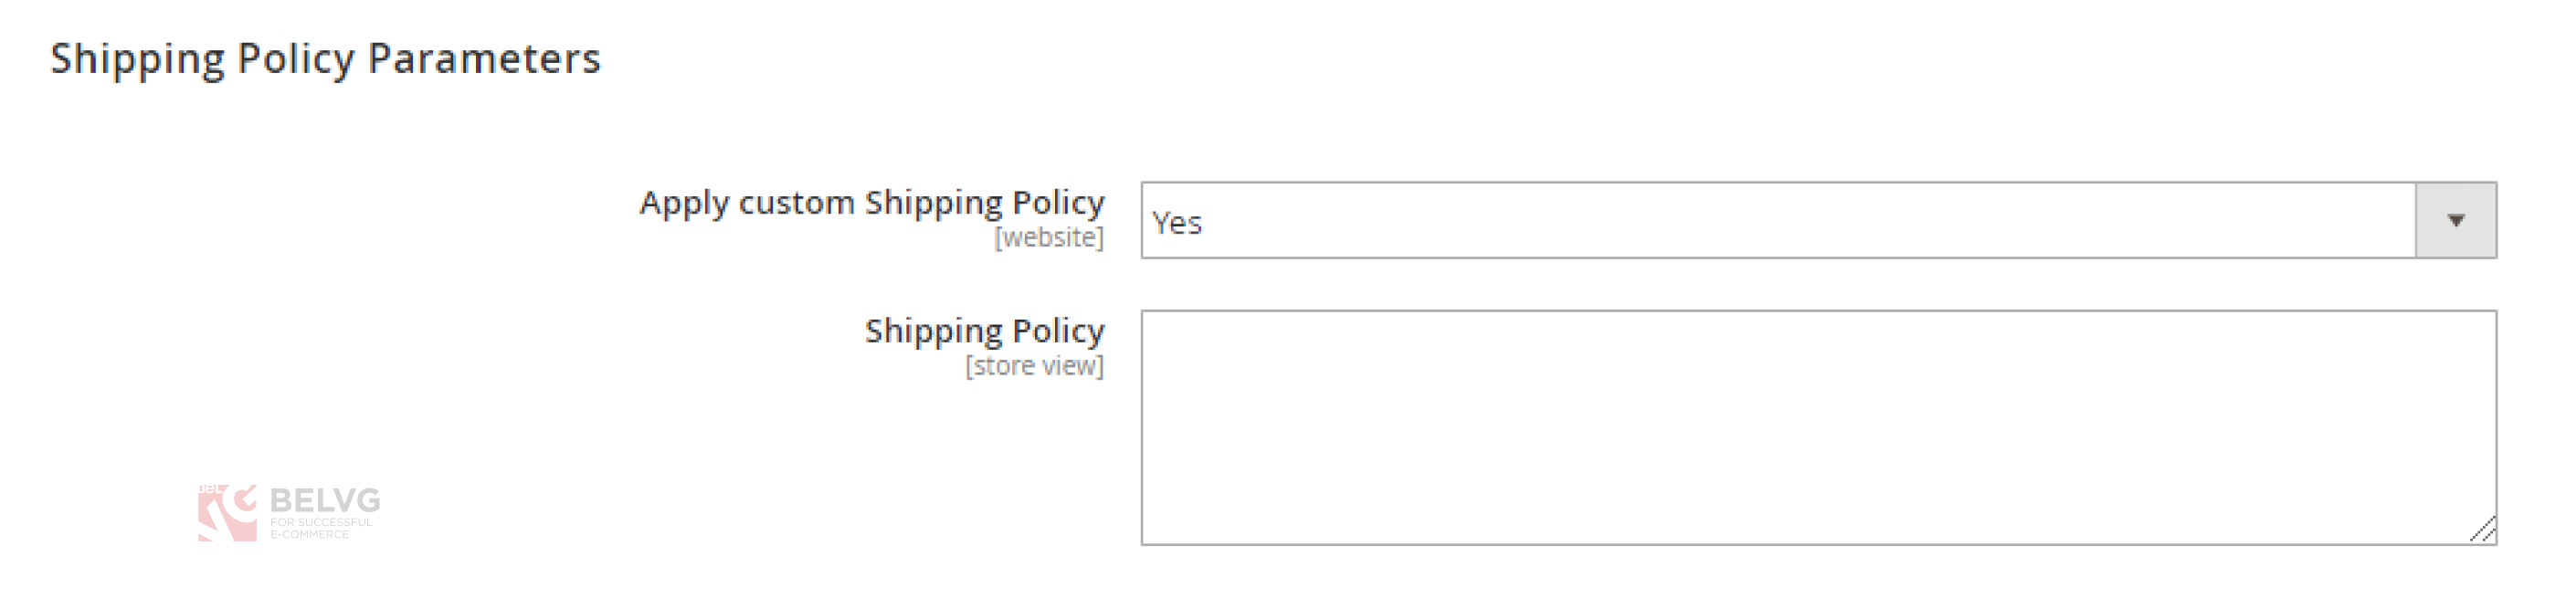 shipping policy field